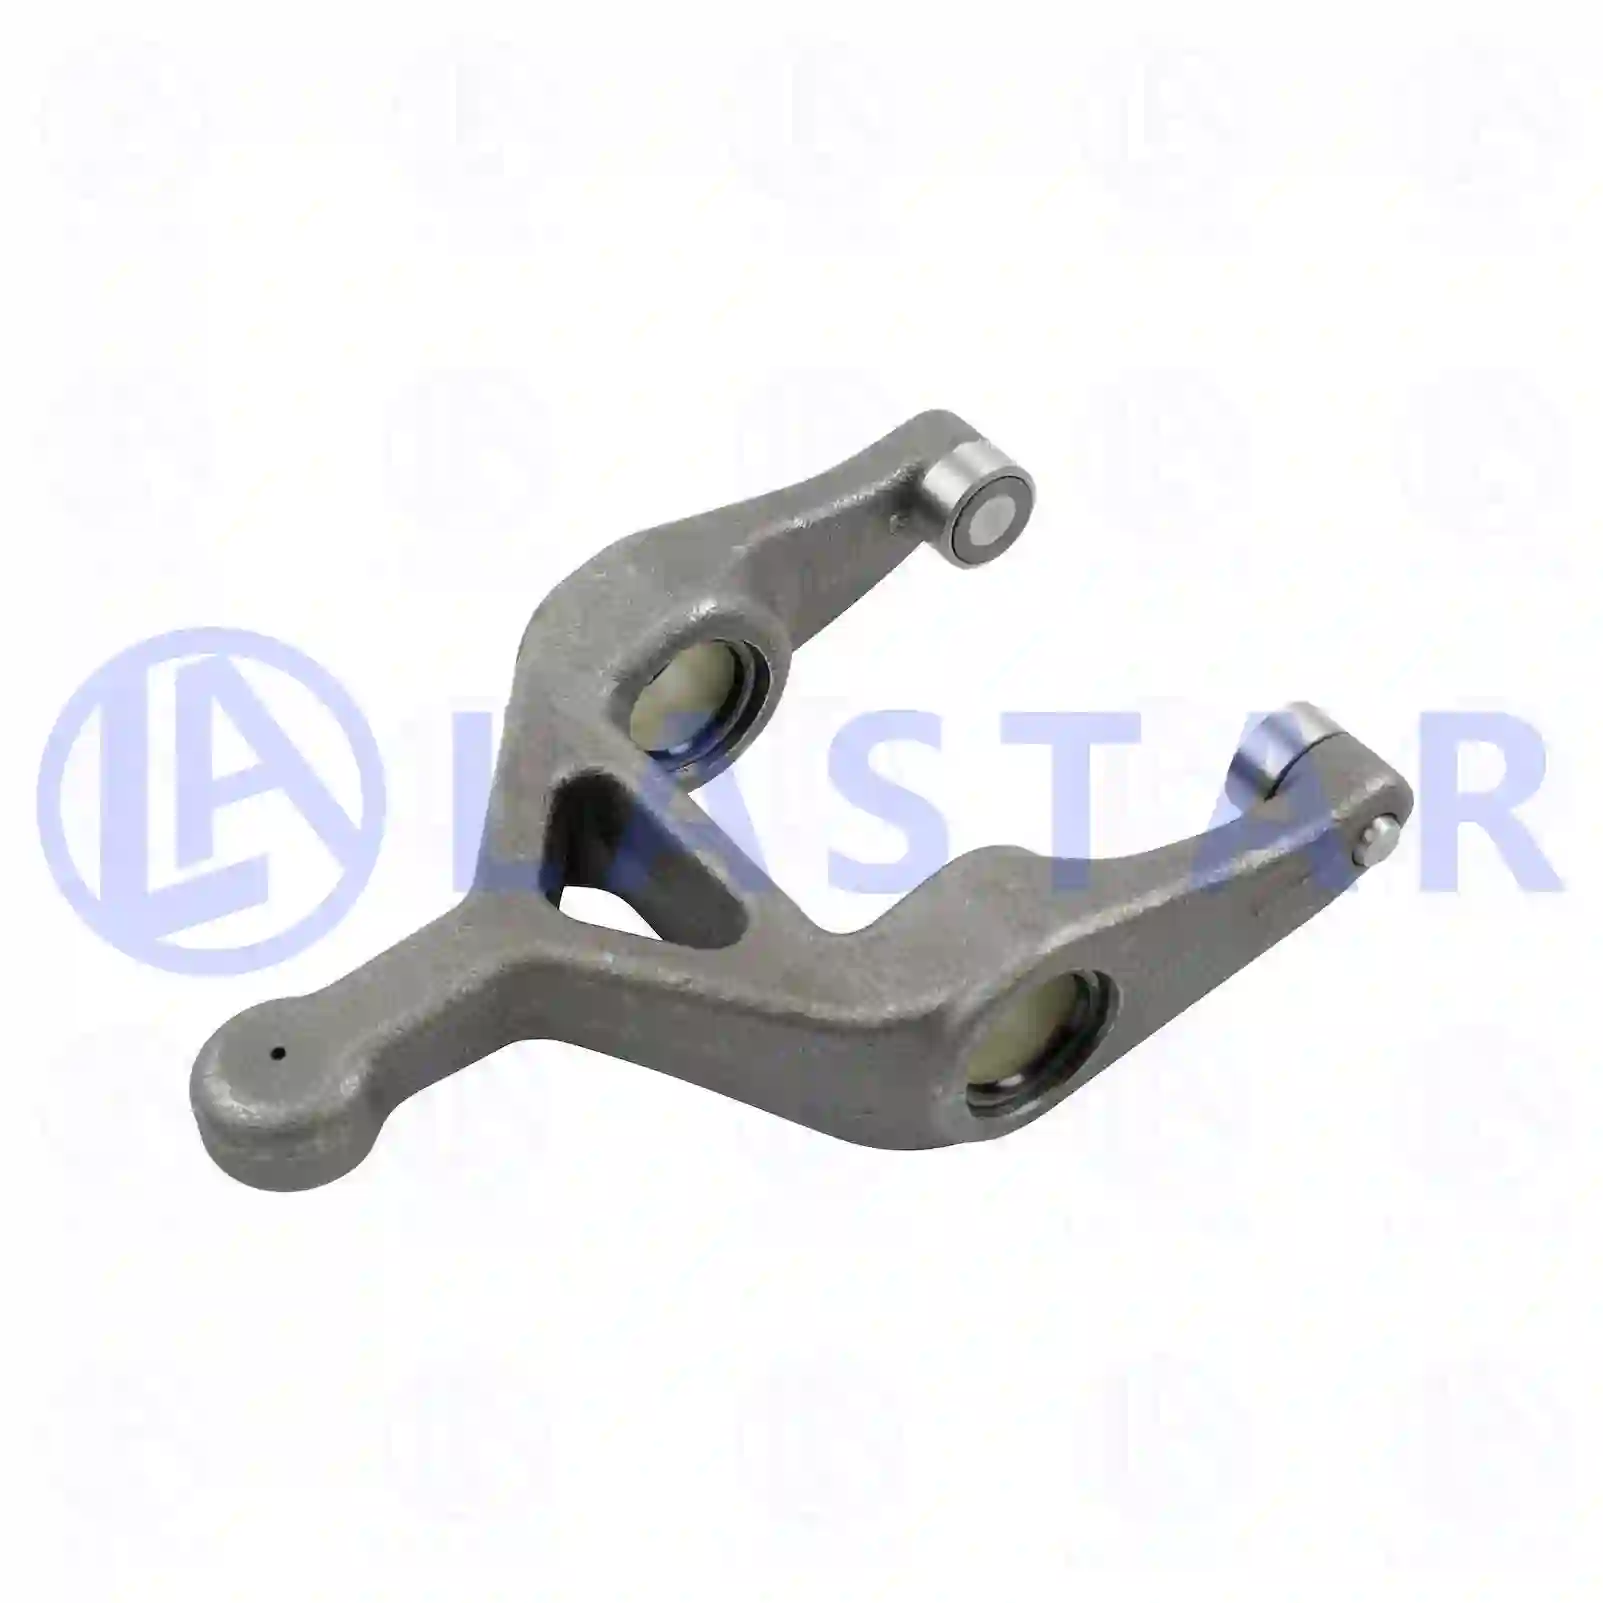 Release fork, 77722440, 6562500213, 6562500413, 6562500813 ||  77722440 Lastar Spare Part | Truck Spare Parts, Auotomotive Spare Parts Release fork, 77722440, 6562500213, 6562500413, 6562500813 ||  77722440 Lastar Spare Part | Truck Spare Parts, Auotomotive Spare Parts